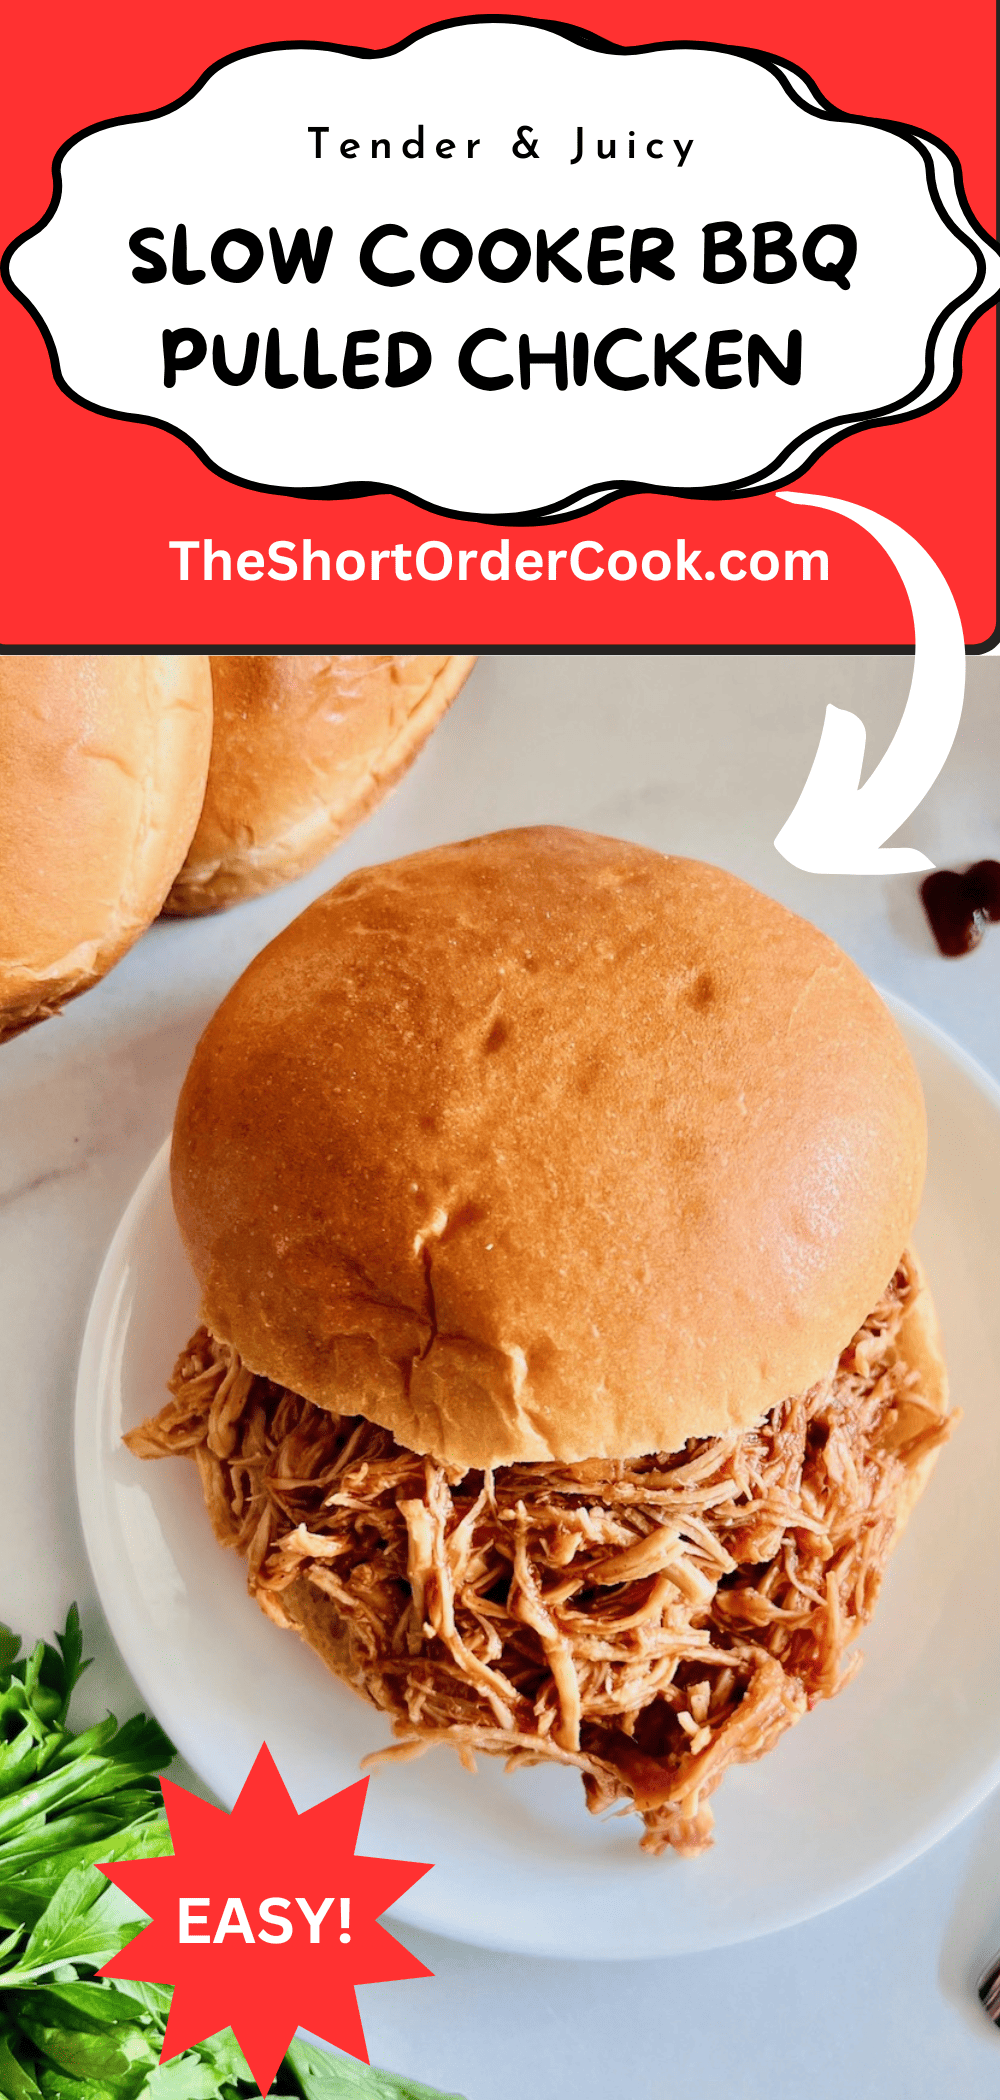 Slow Cooker BBQ Pulled Chicken on a bun.